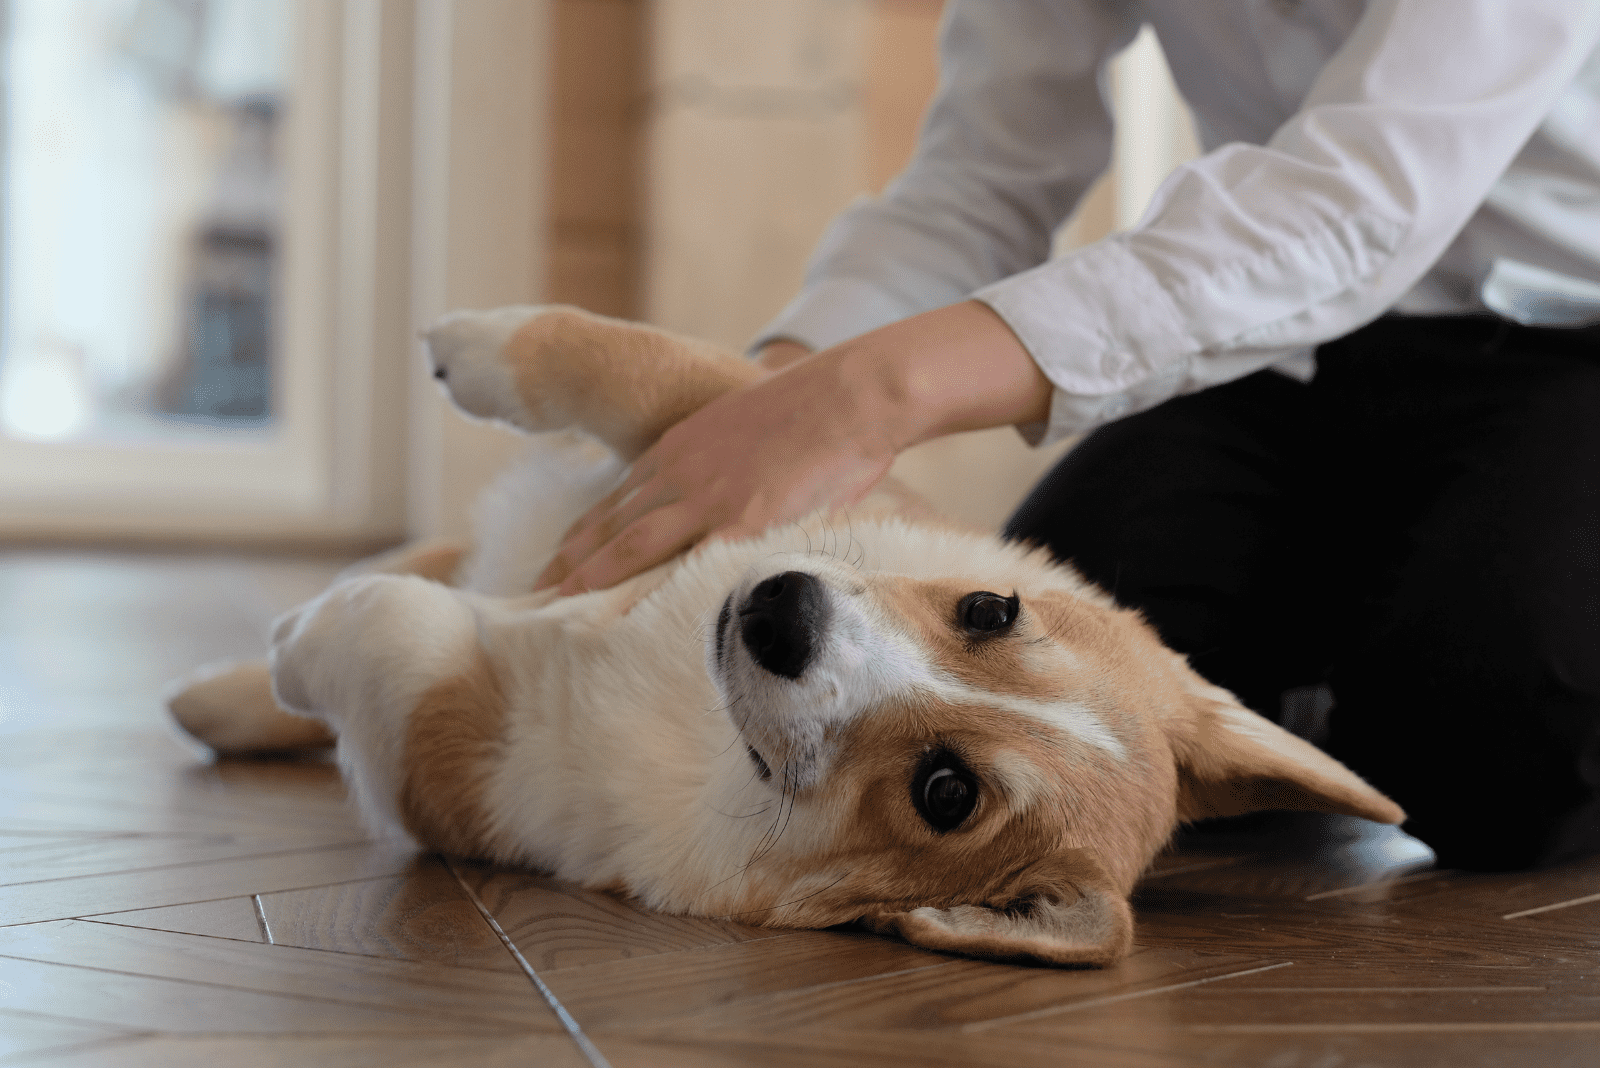 Dog Swollen Stomach No Pain, Causes And How To Stay Sane